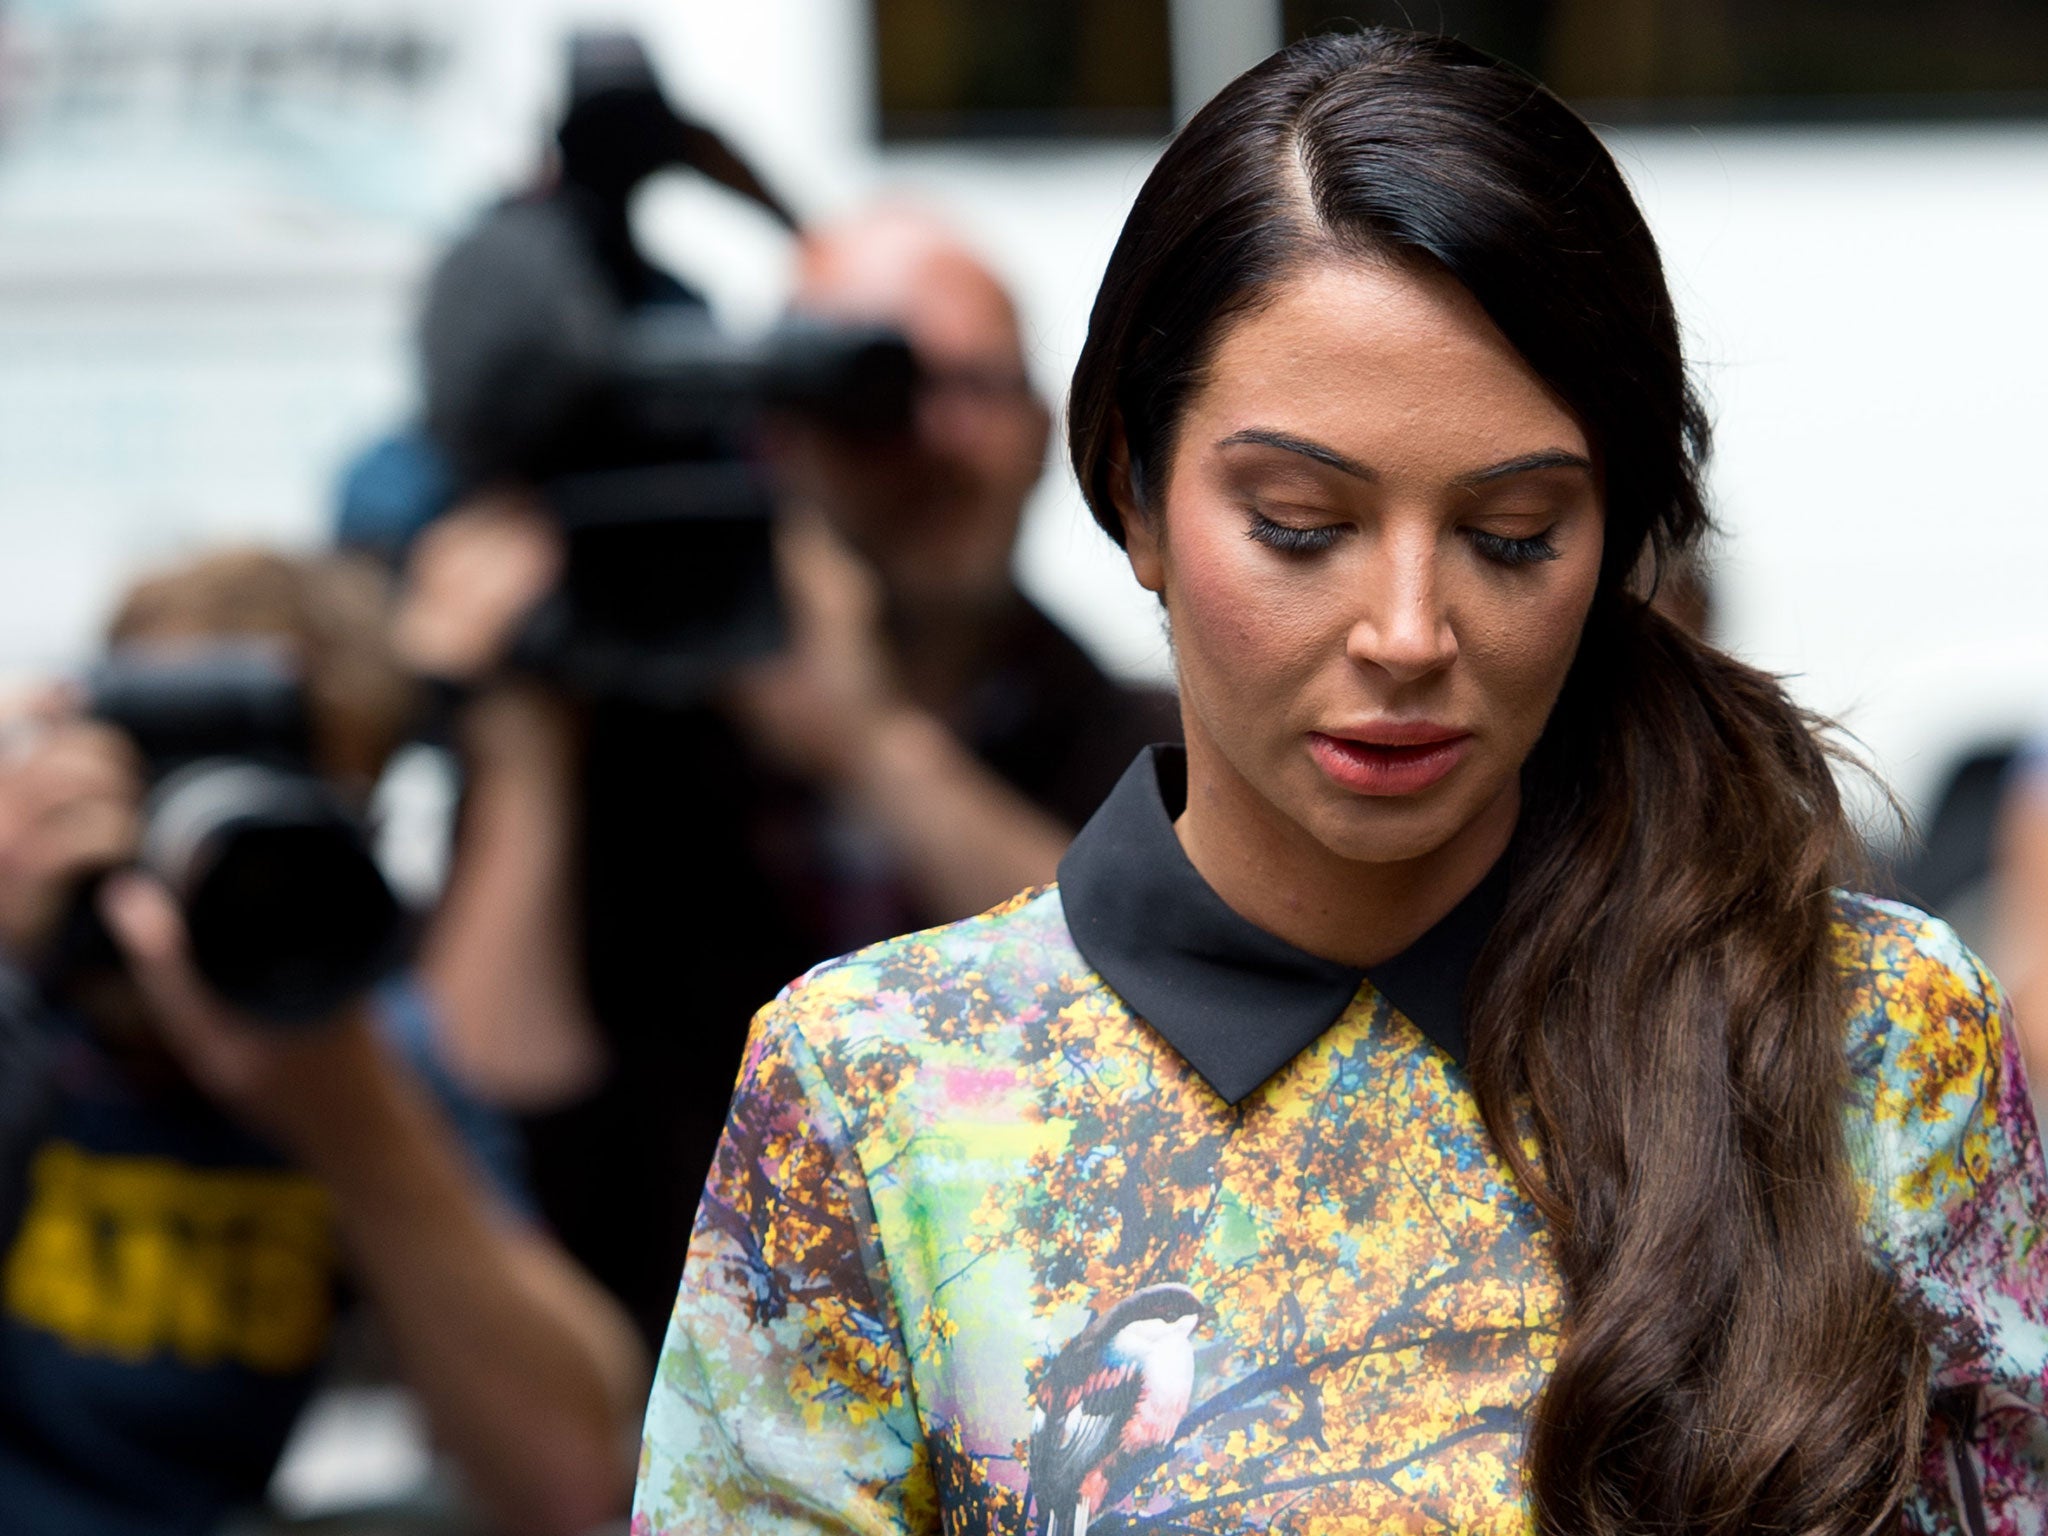 Tulisa Contostavlos during her abandoned drugs trial in July